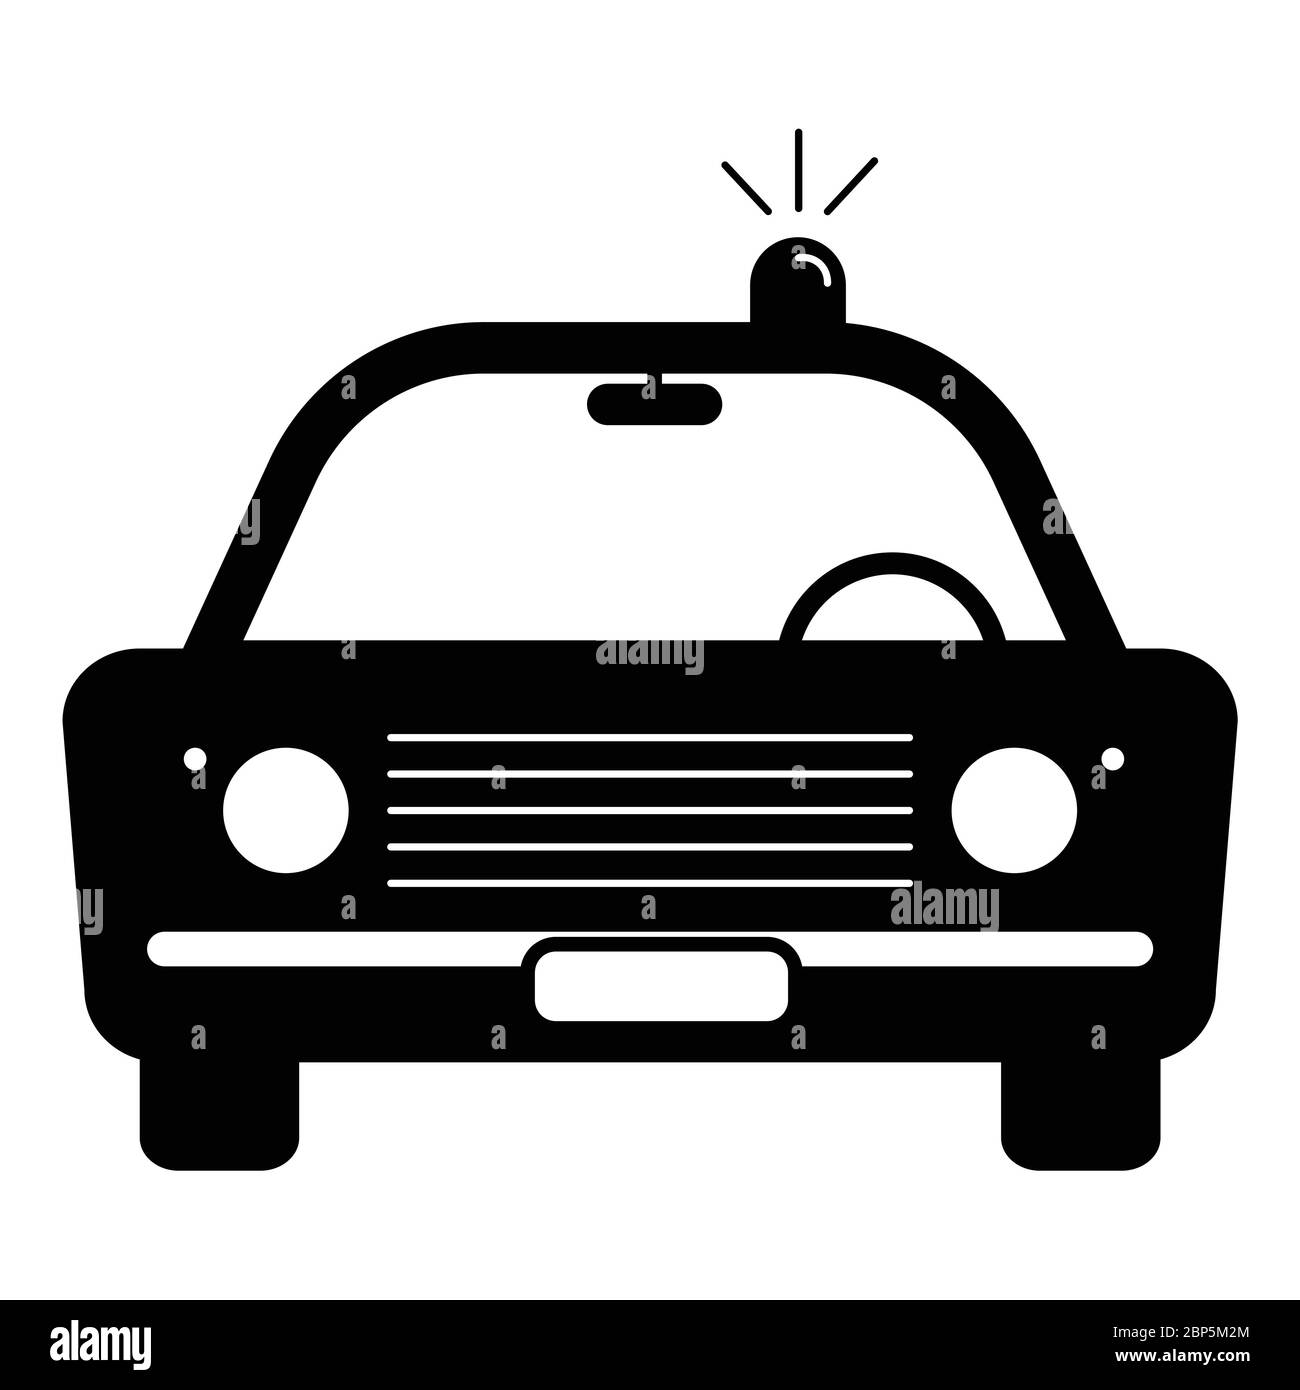 Police Cop Car Vintage with siren front view. Simple black and white illustration depicting police emergency response vehicle car with flash. EPS Vect Stock Vector